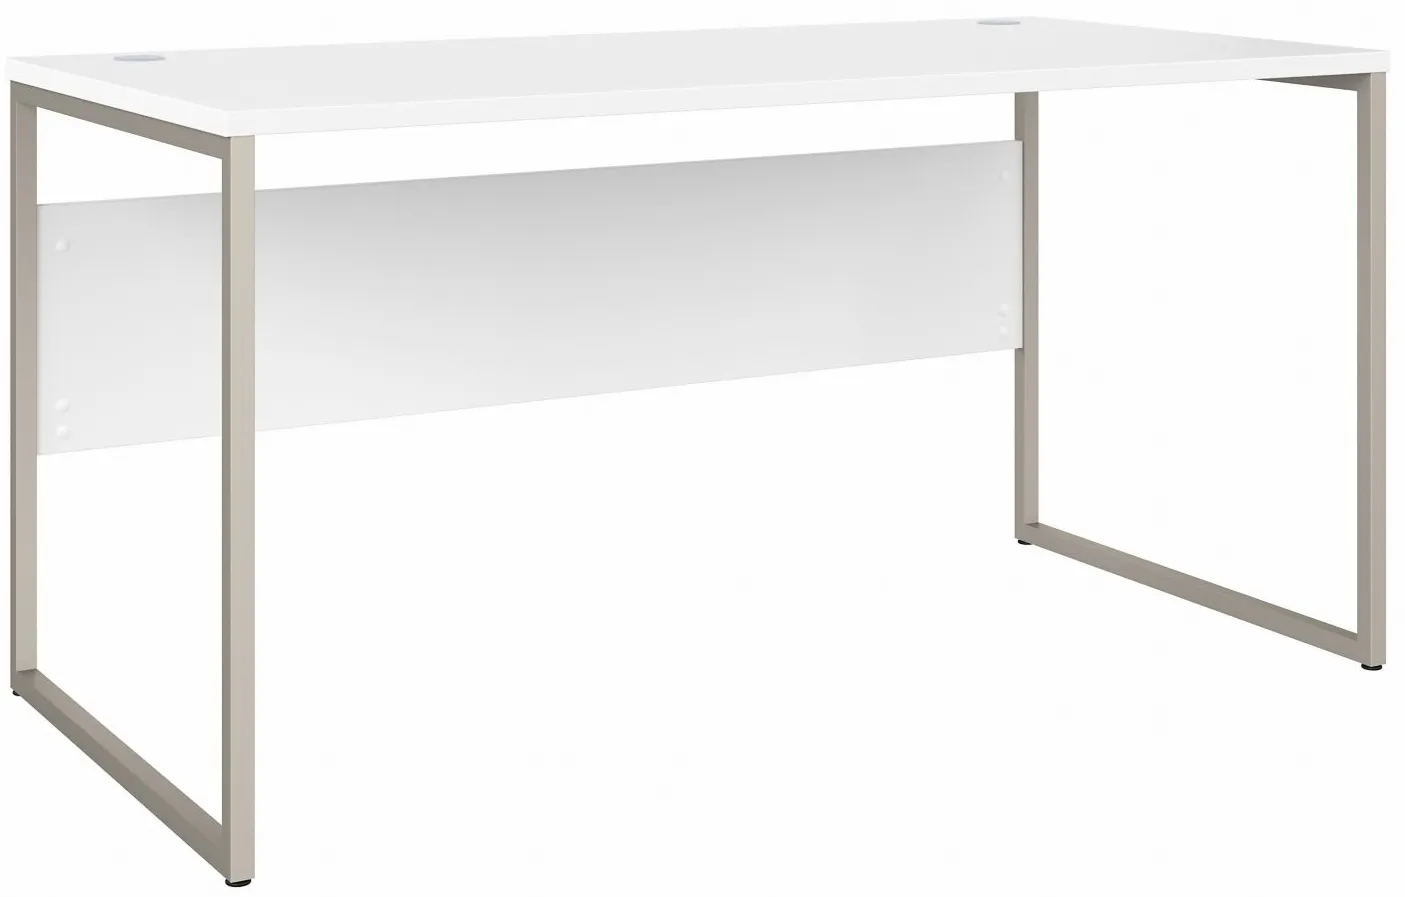 Steinbeck Writing Desk in White by Bush Industries